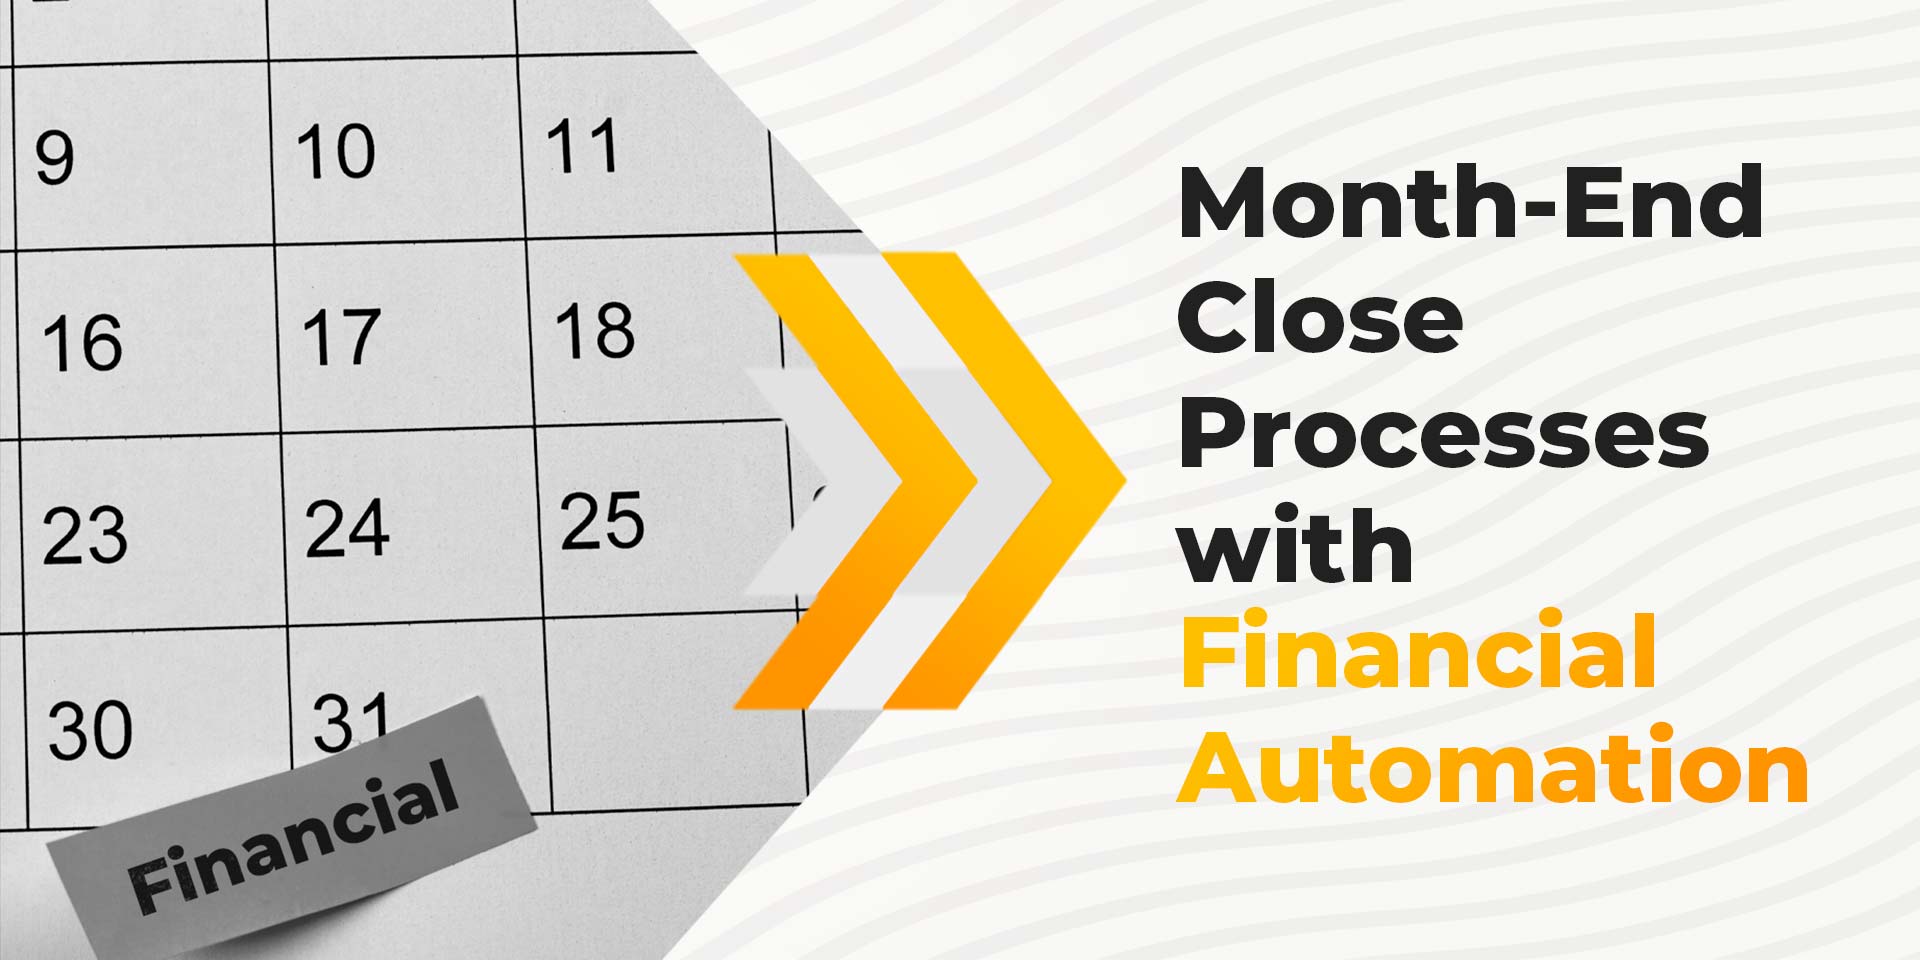 Streamline Month-End Close Processes with SAP Automation and Financial Automation Tools